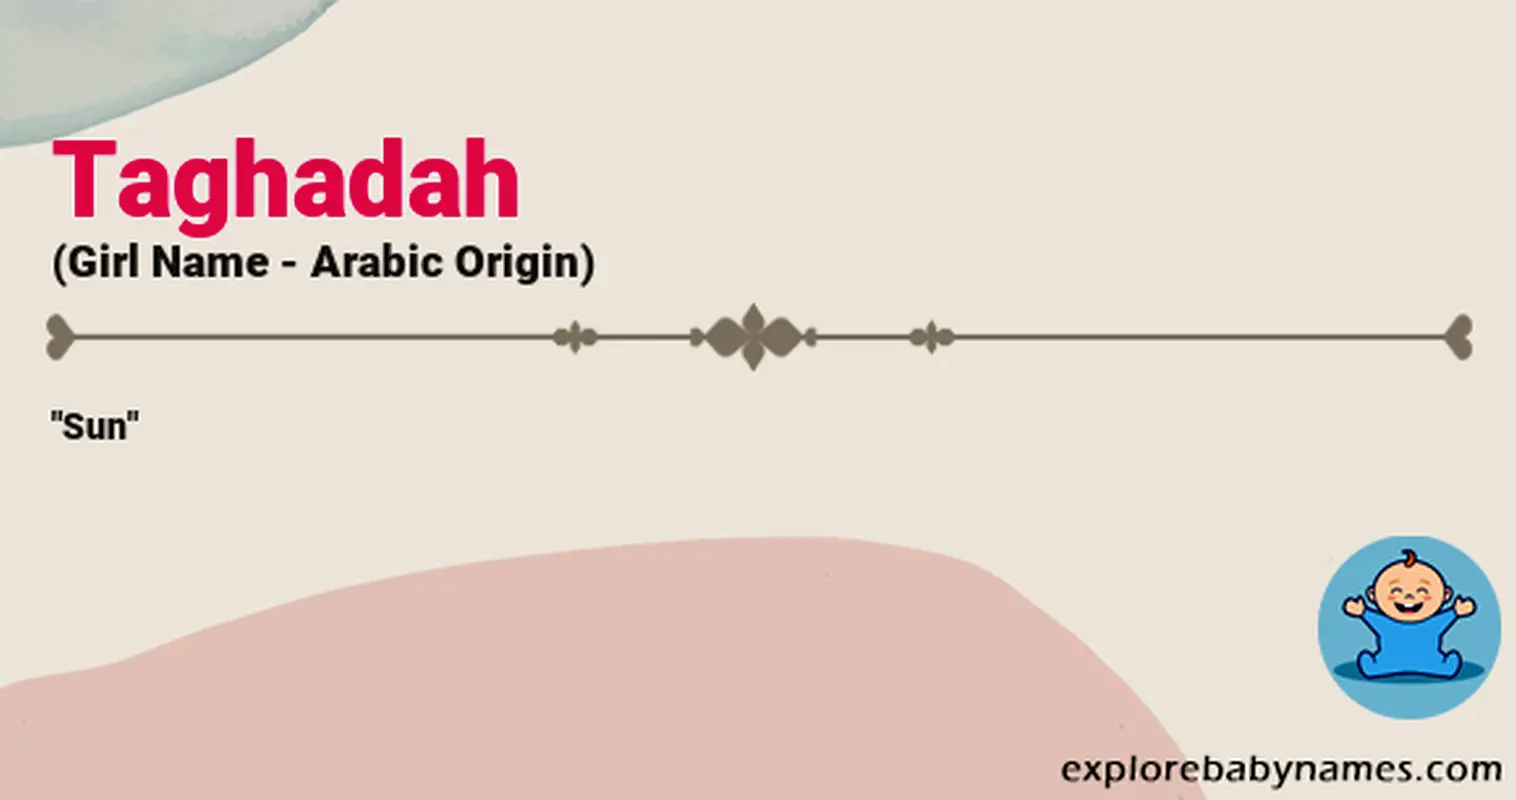 Meaning of Taghadah